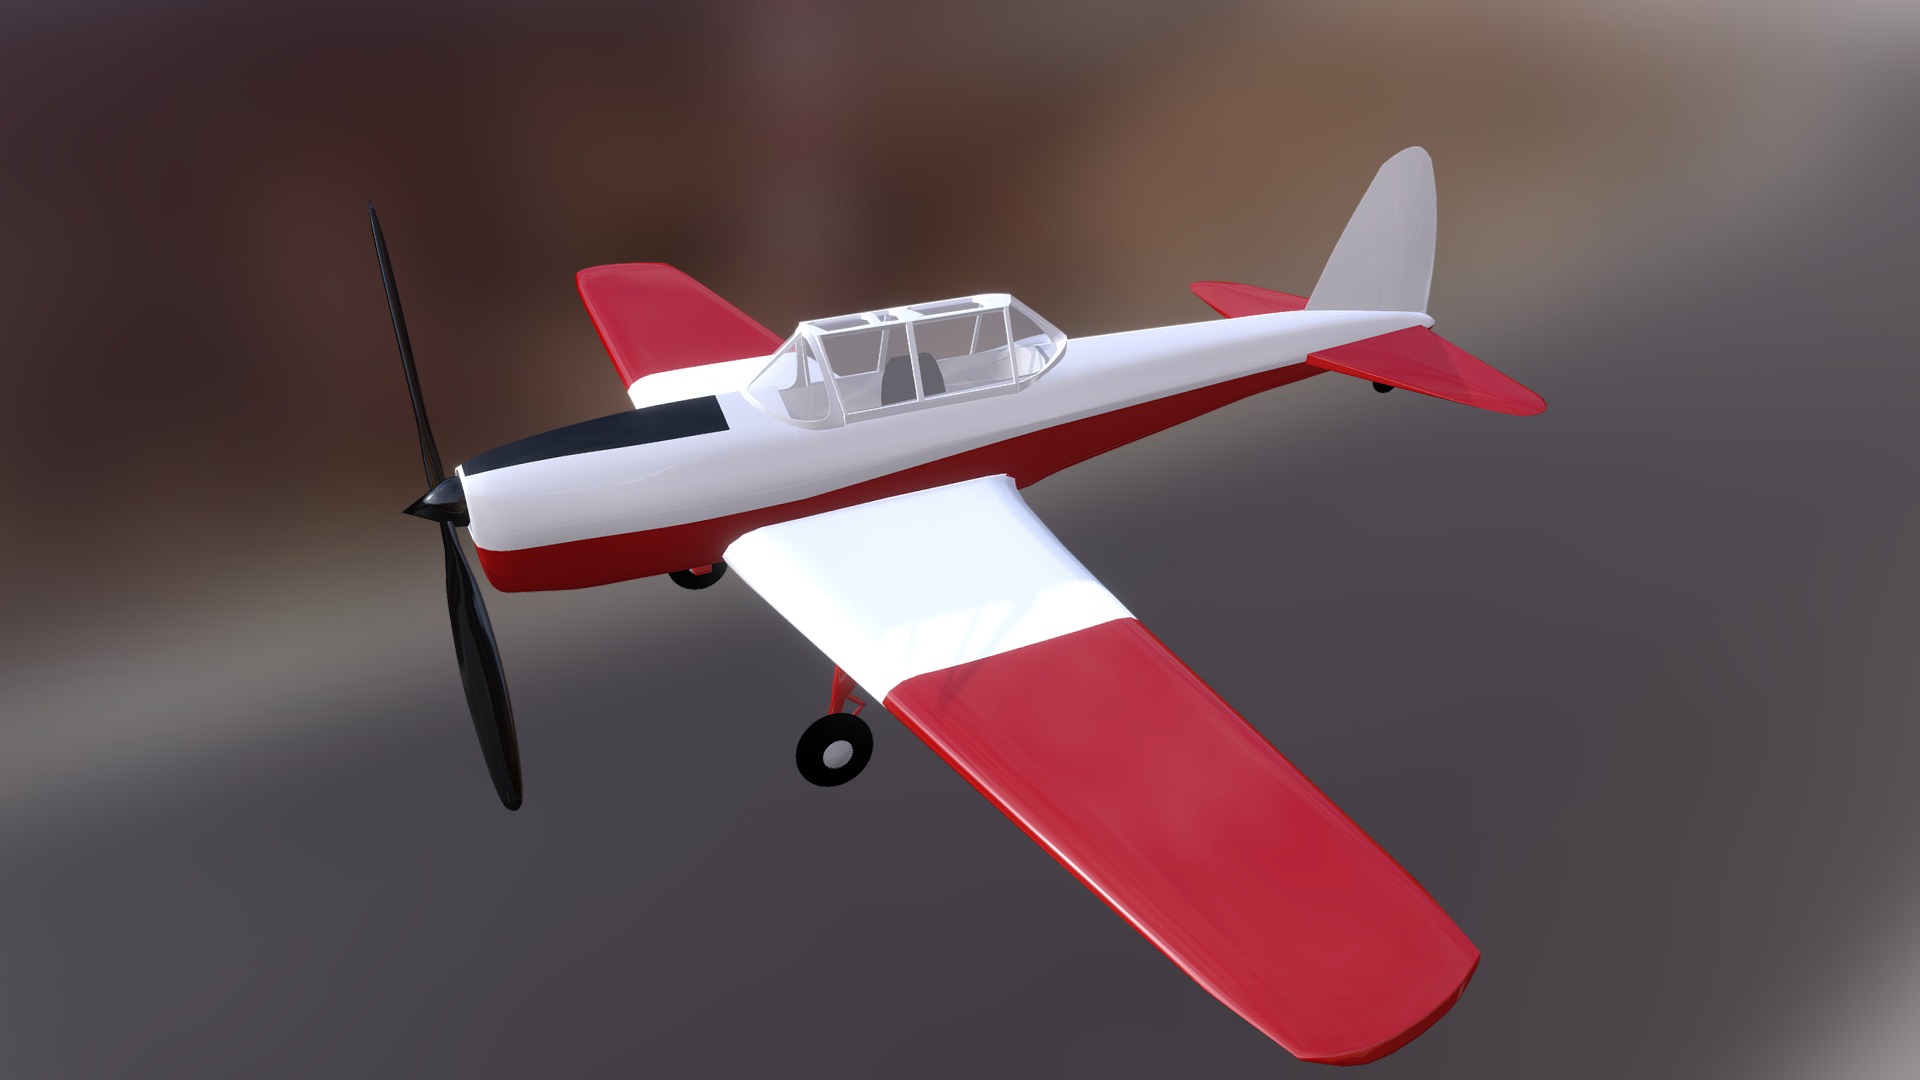 3D model de Havilland Canada DHC-1 Chipmunk - This is a 3D model of the de Havilland Canada DHC-1 Chipmunk. The 3D model is about a small red and white airplane.